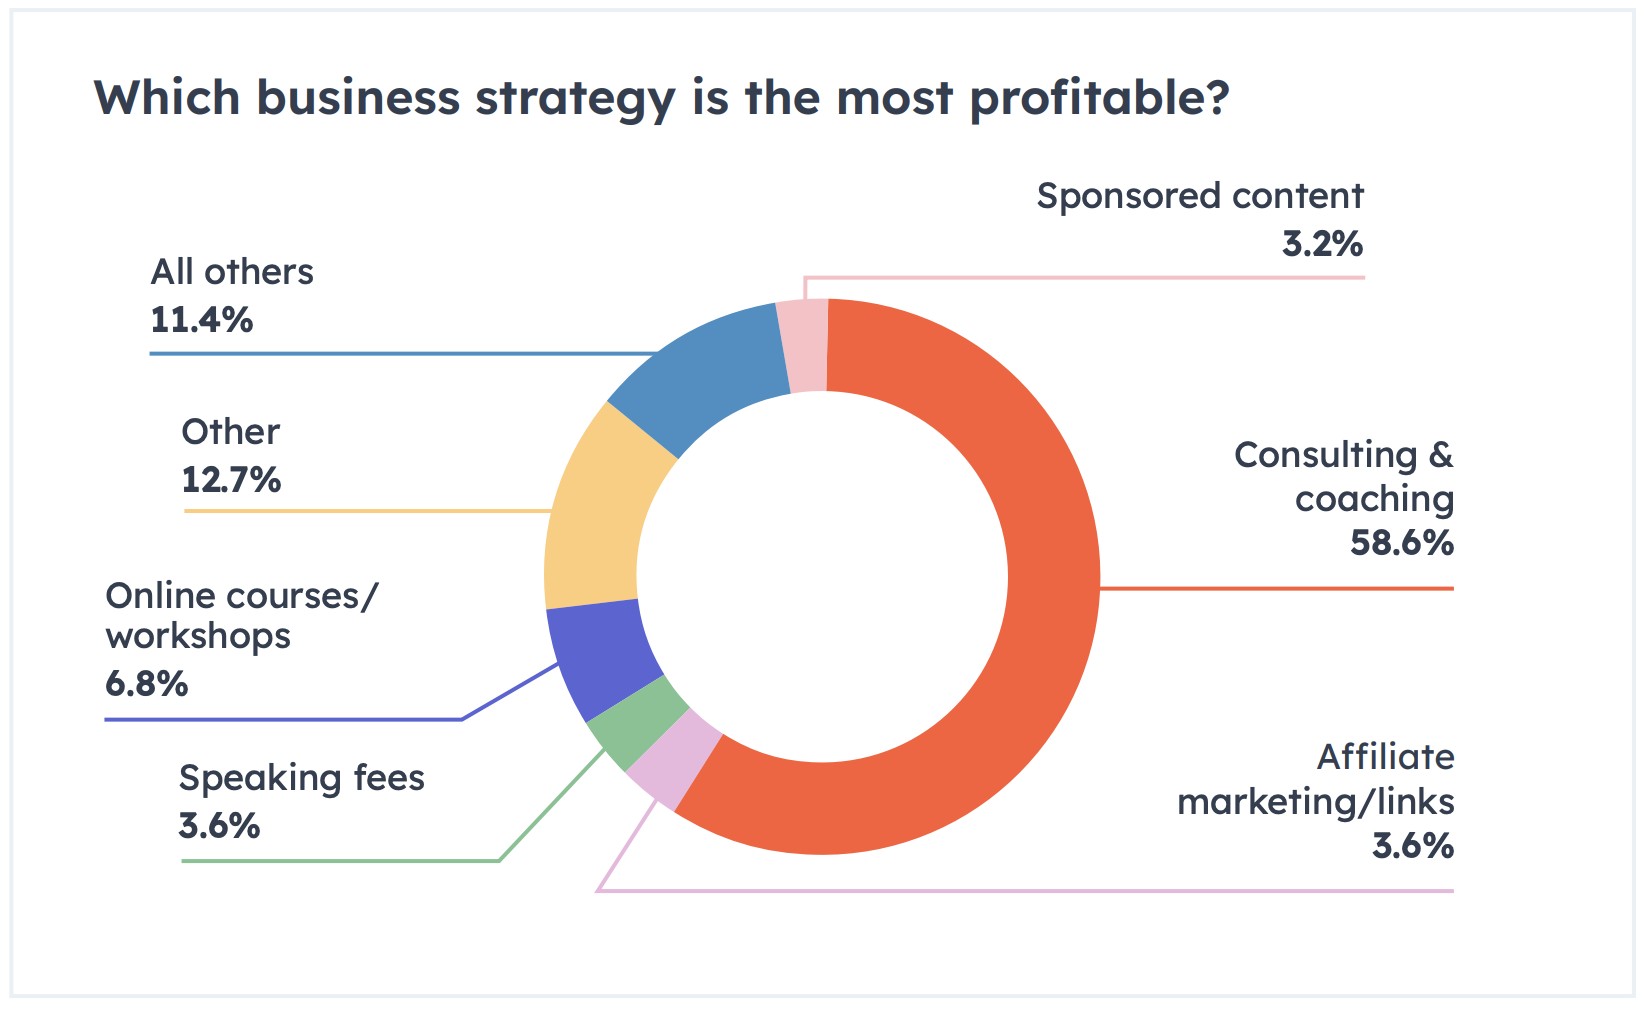 which business strategy is most profitable for content creators